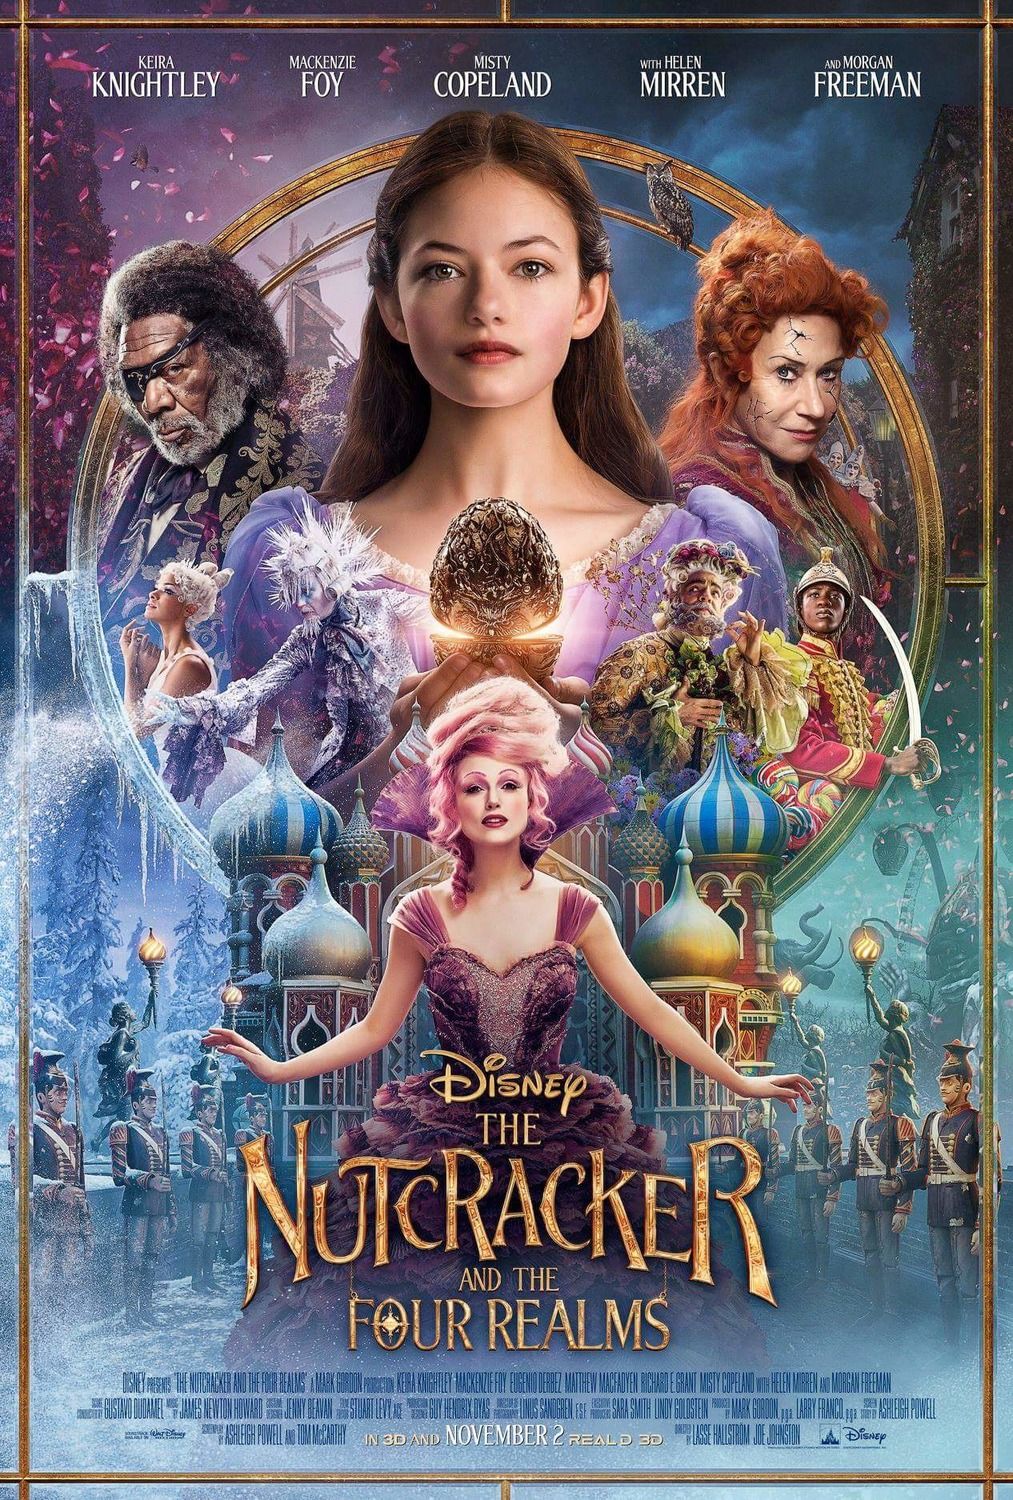 Nutcracker and the Four Realms movie poster